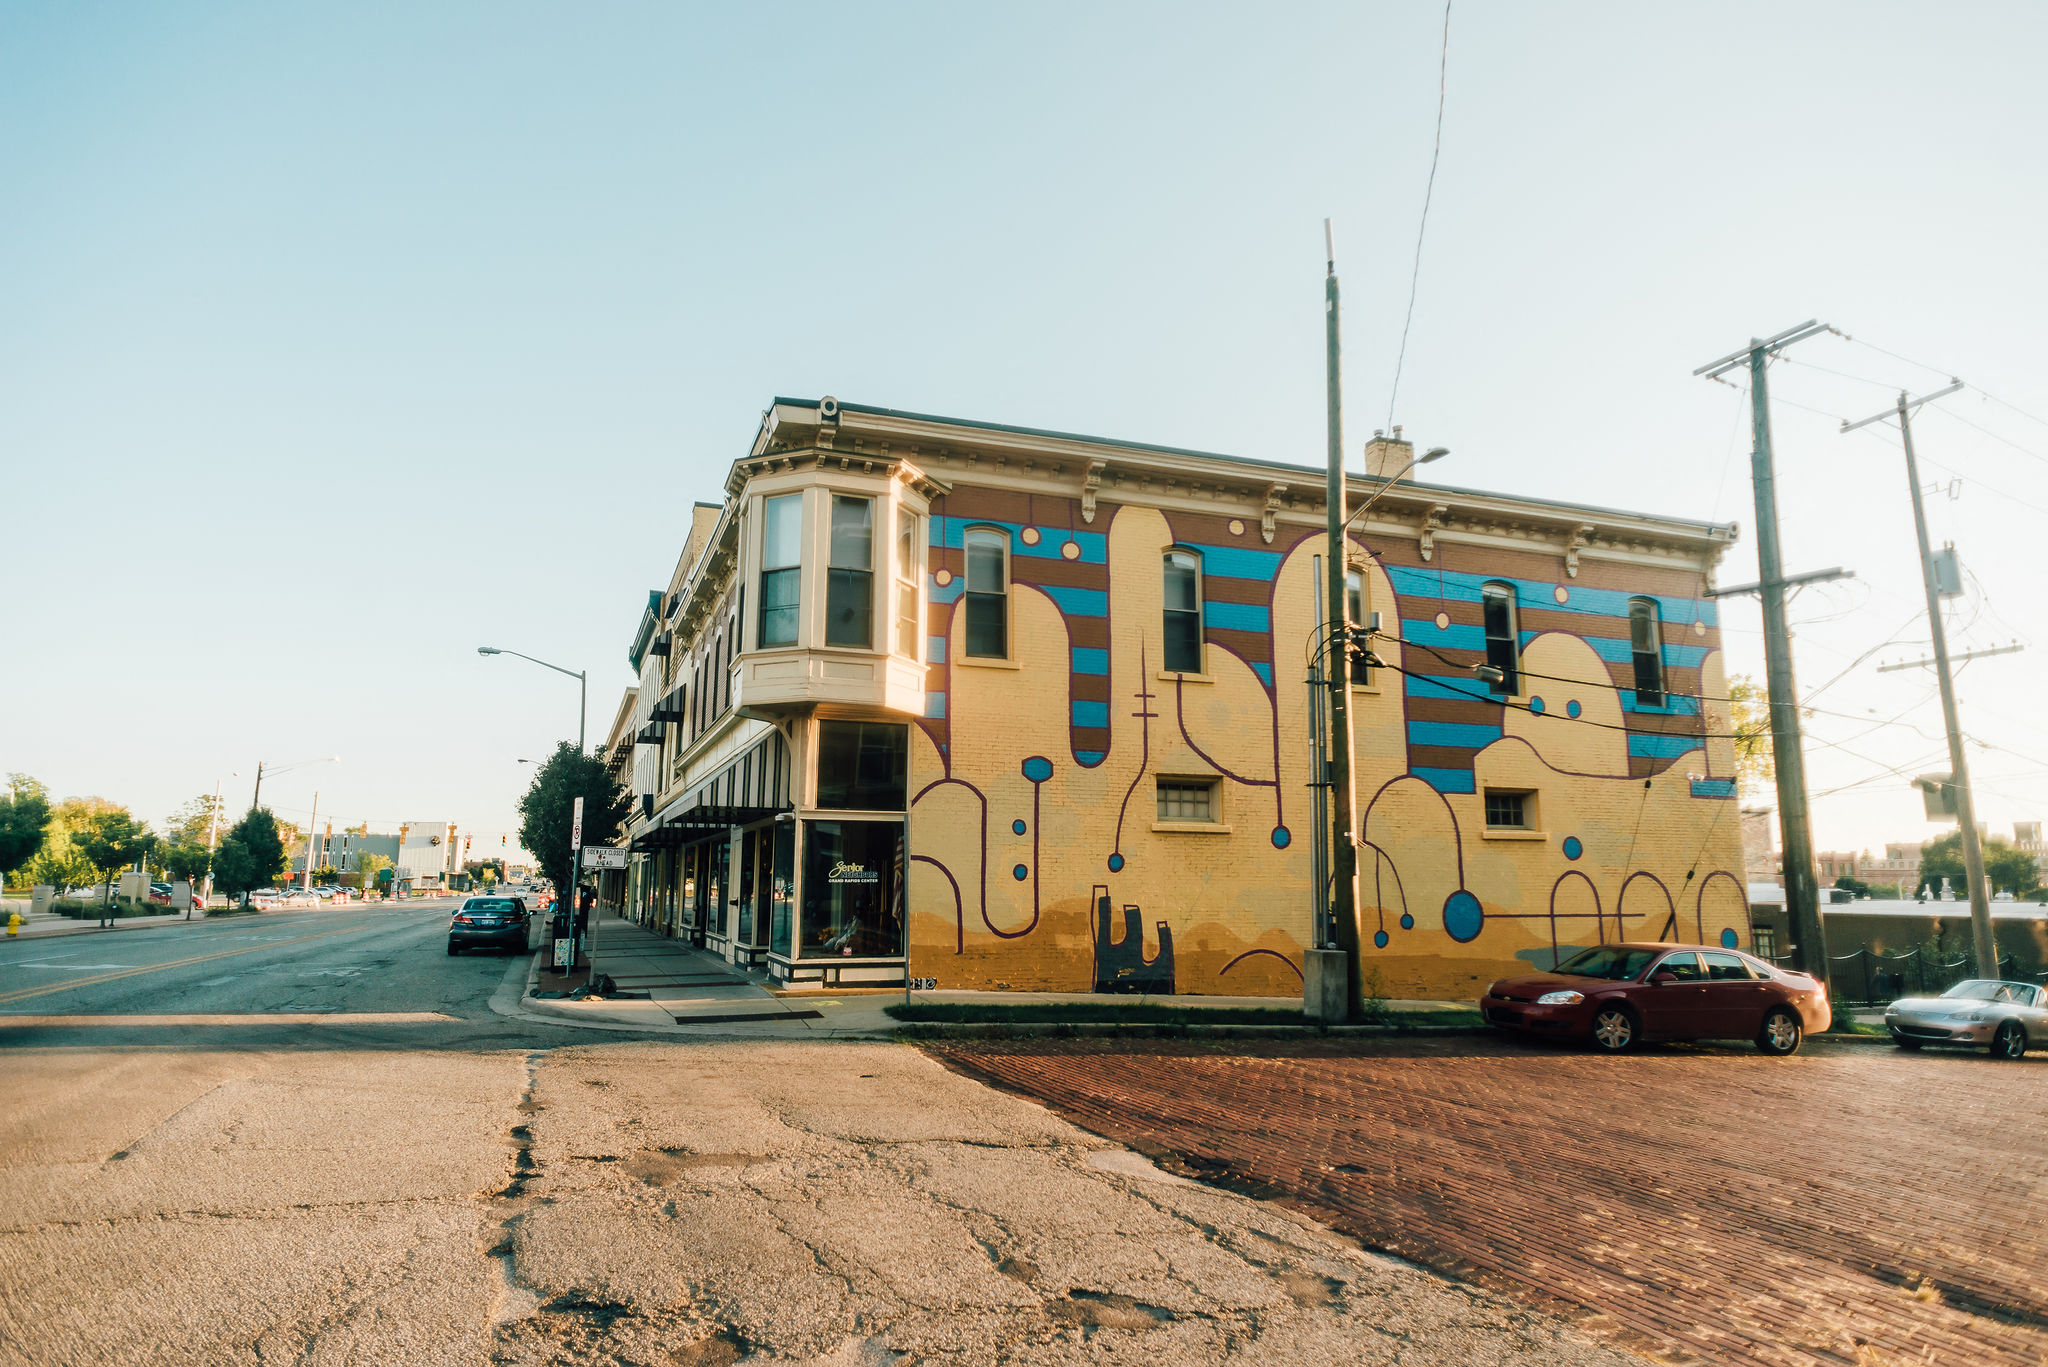 historic building with mural downtown